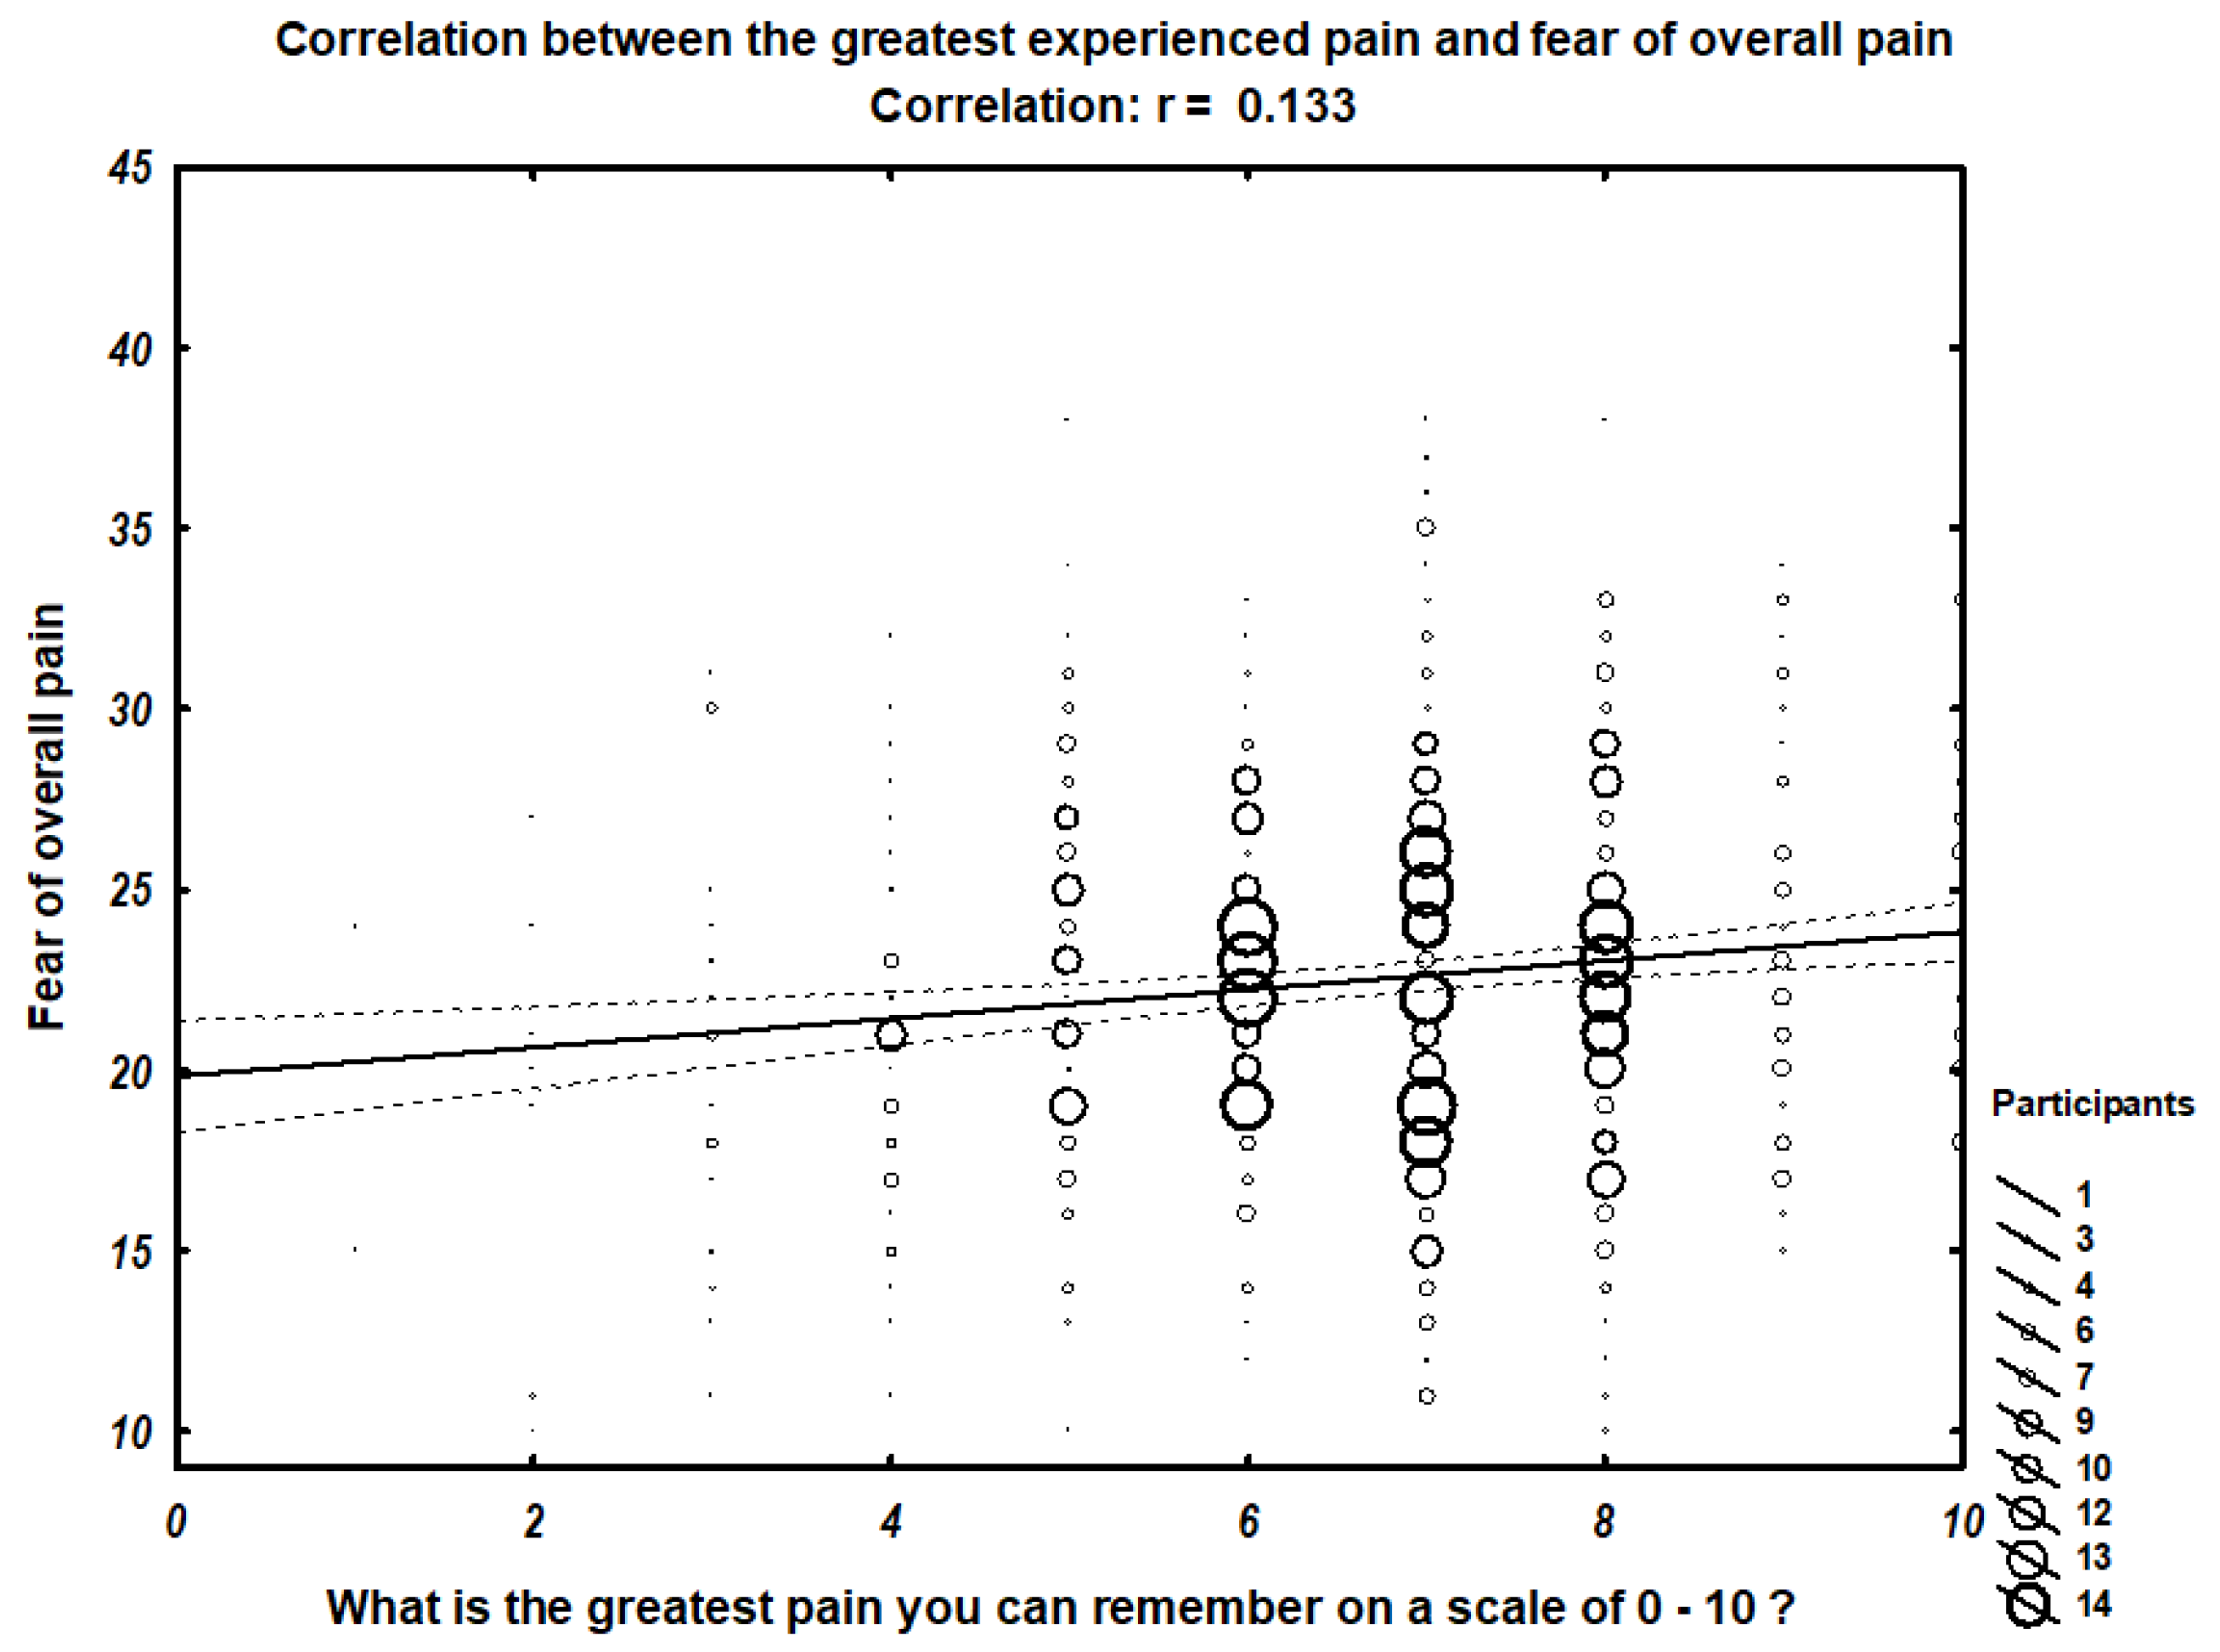 IJERPH | Free Full-Text | Association of Gender, Painkiller Use, and  Experienced Pain with Pain-Related Fear and Anxiety among University  Students According to the Fear of Pain Questionnaire-9